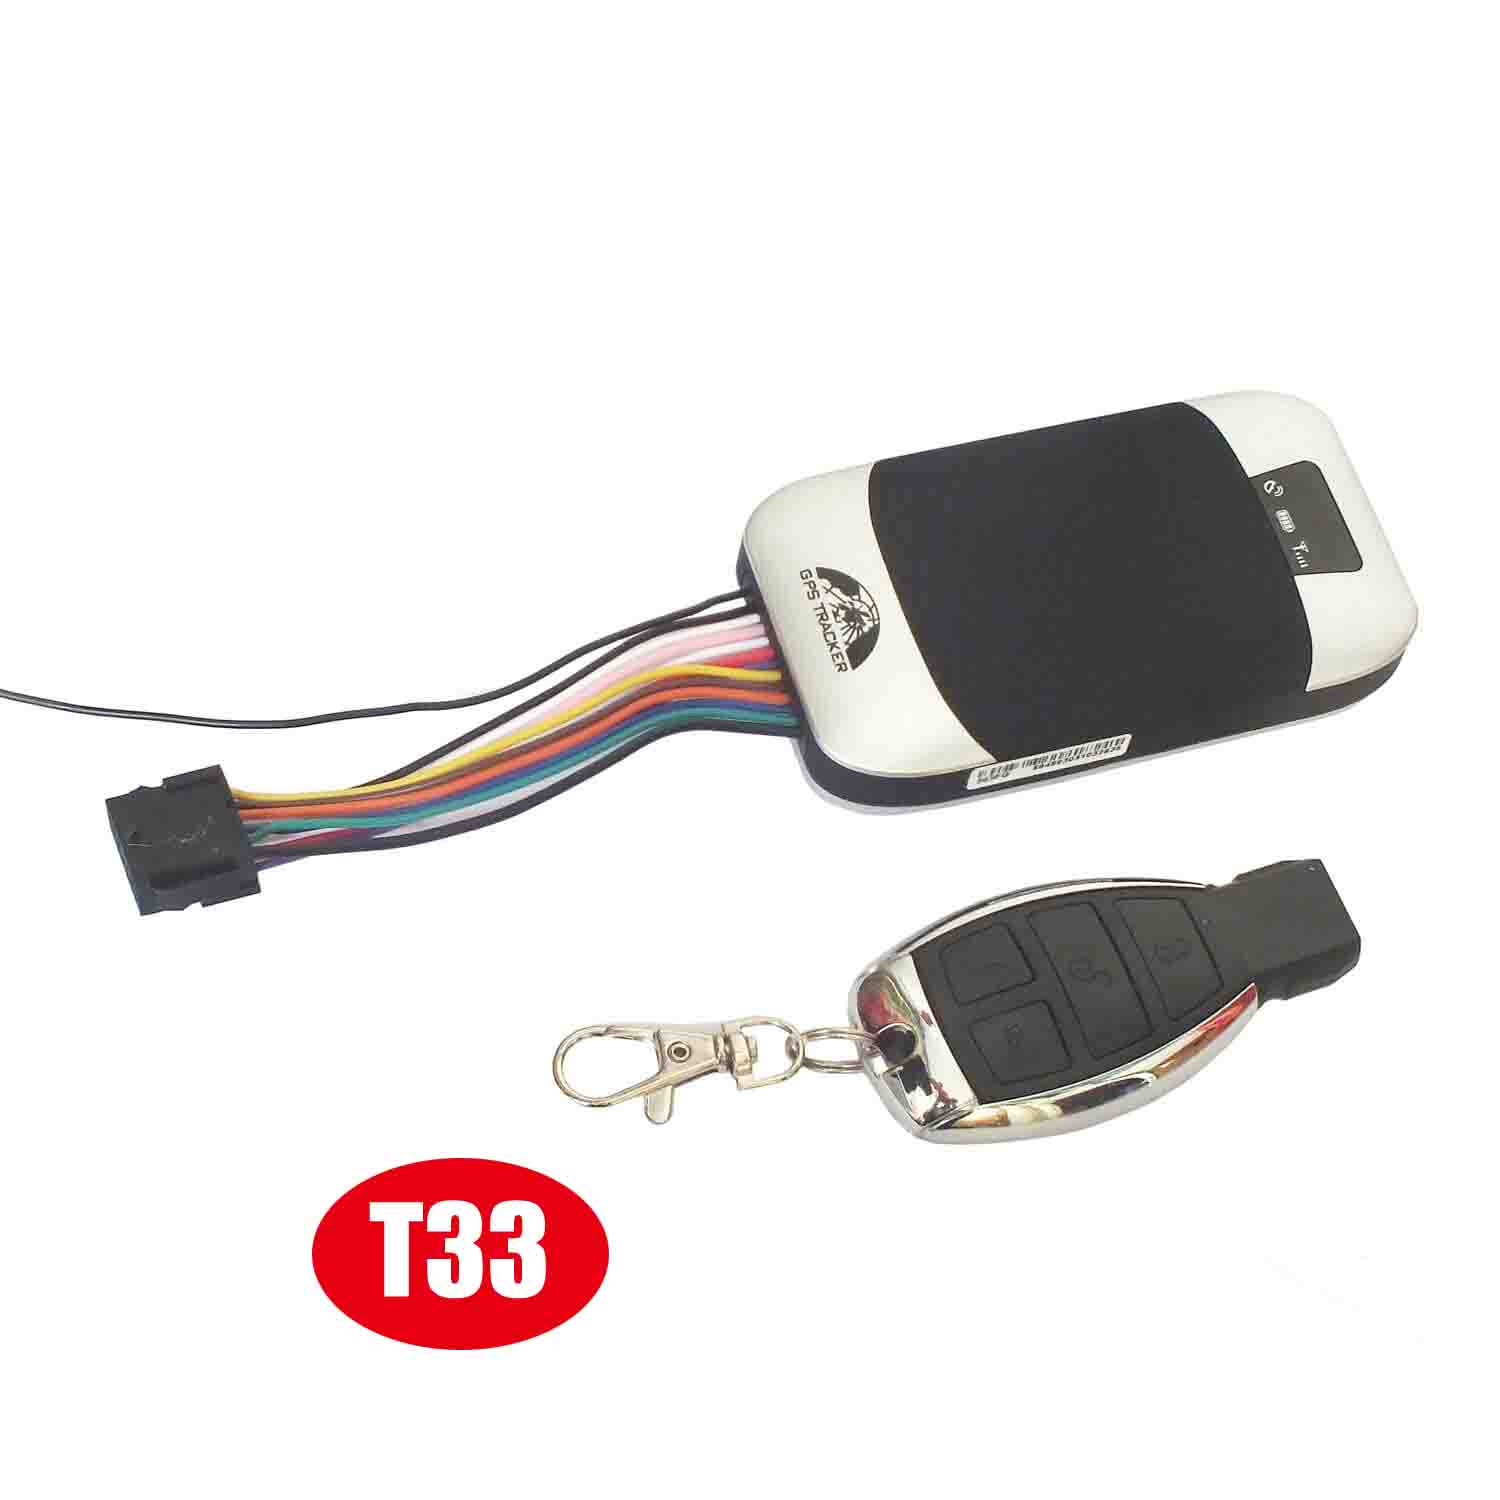 China factory 3G IP67 Waterproof Car Motorcycle Vehicle GPS tracking device with Remote Cut off engine T33